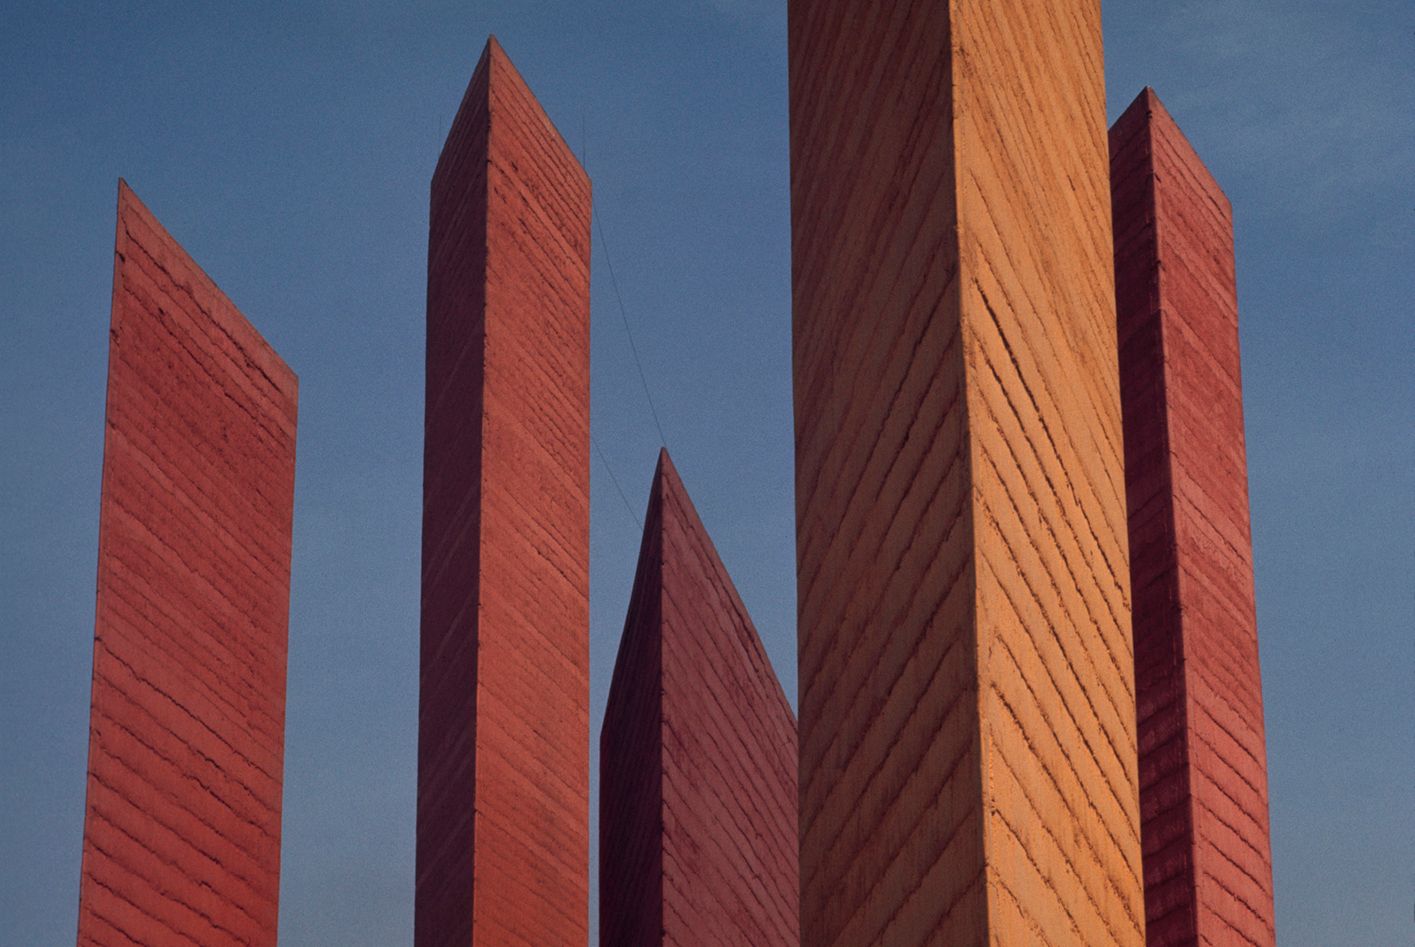 The Towers of Satellite City, Mexico City, 1969, by Rene Burri